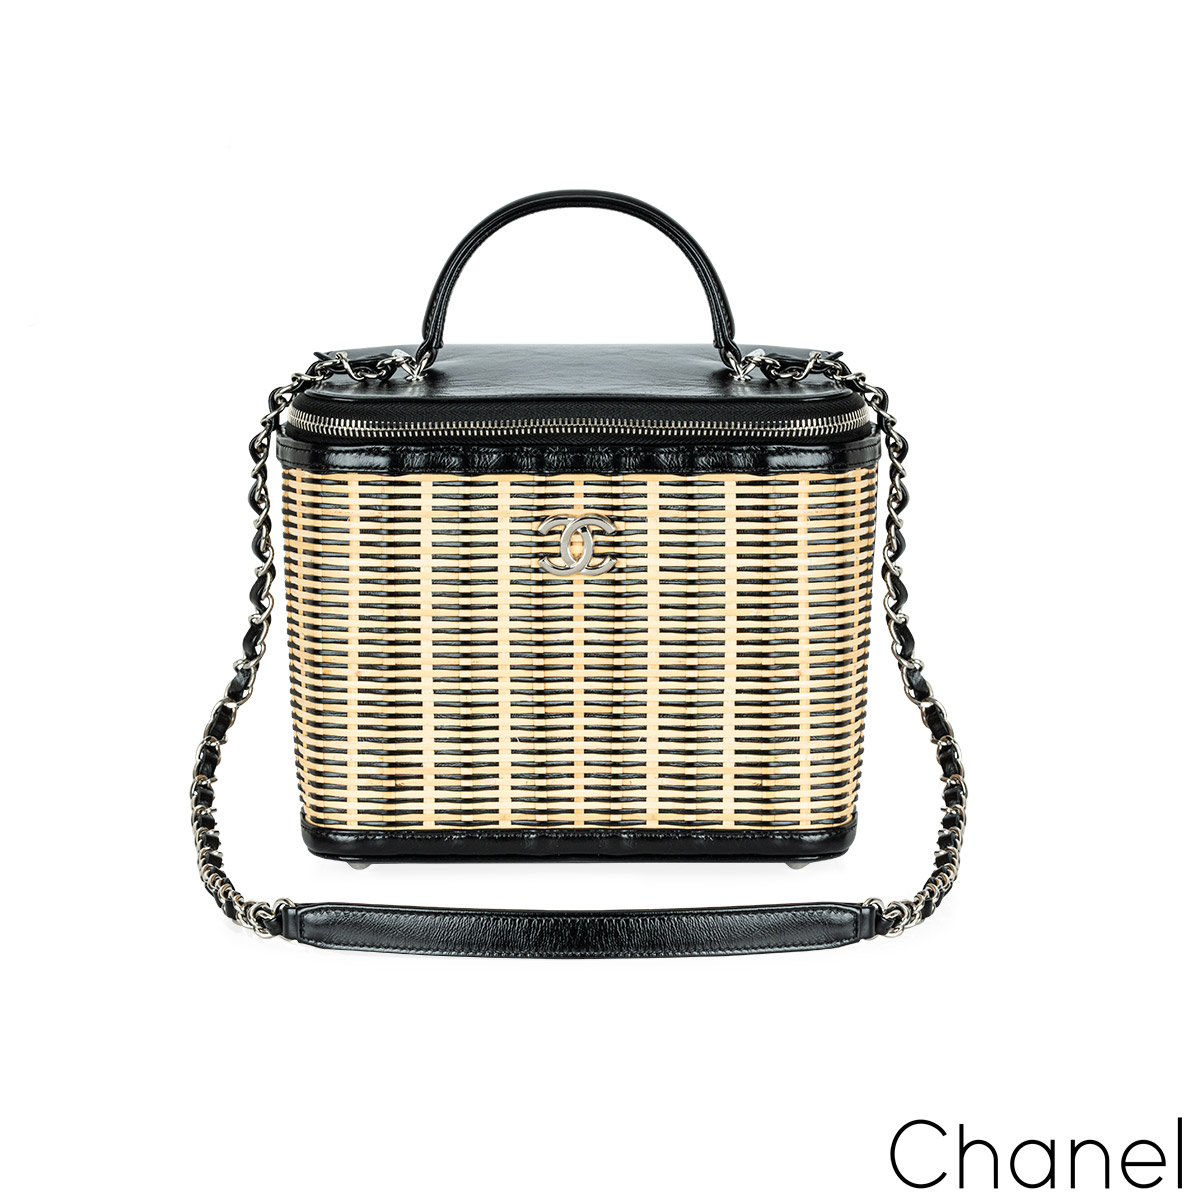 New CHANEL Bird Cage BagA Unique Runway Evening Bag From 2020202 FW  Collection  eBay